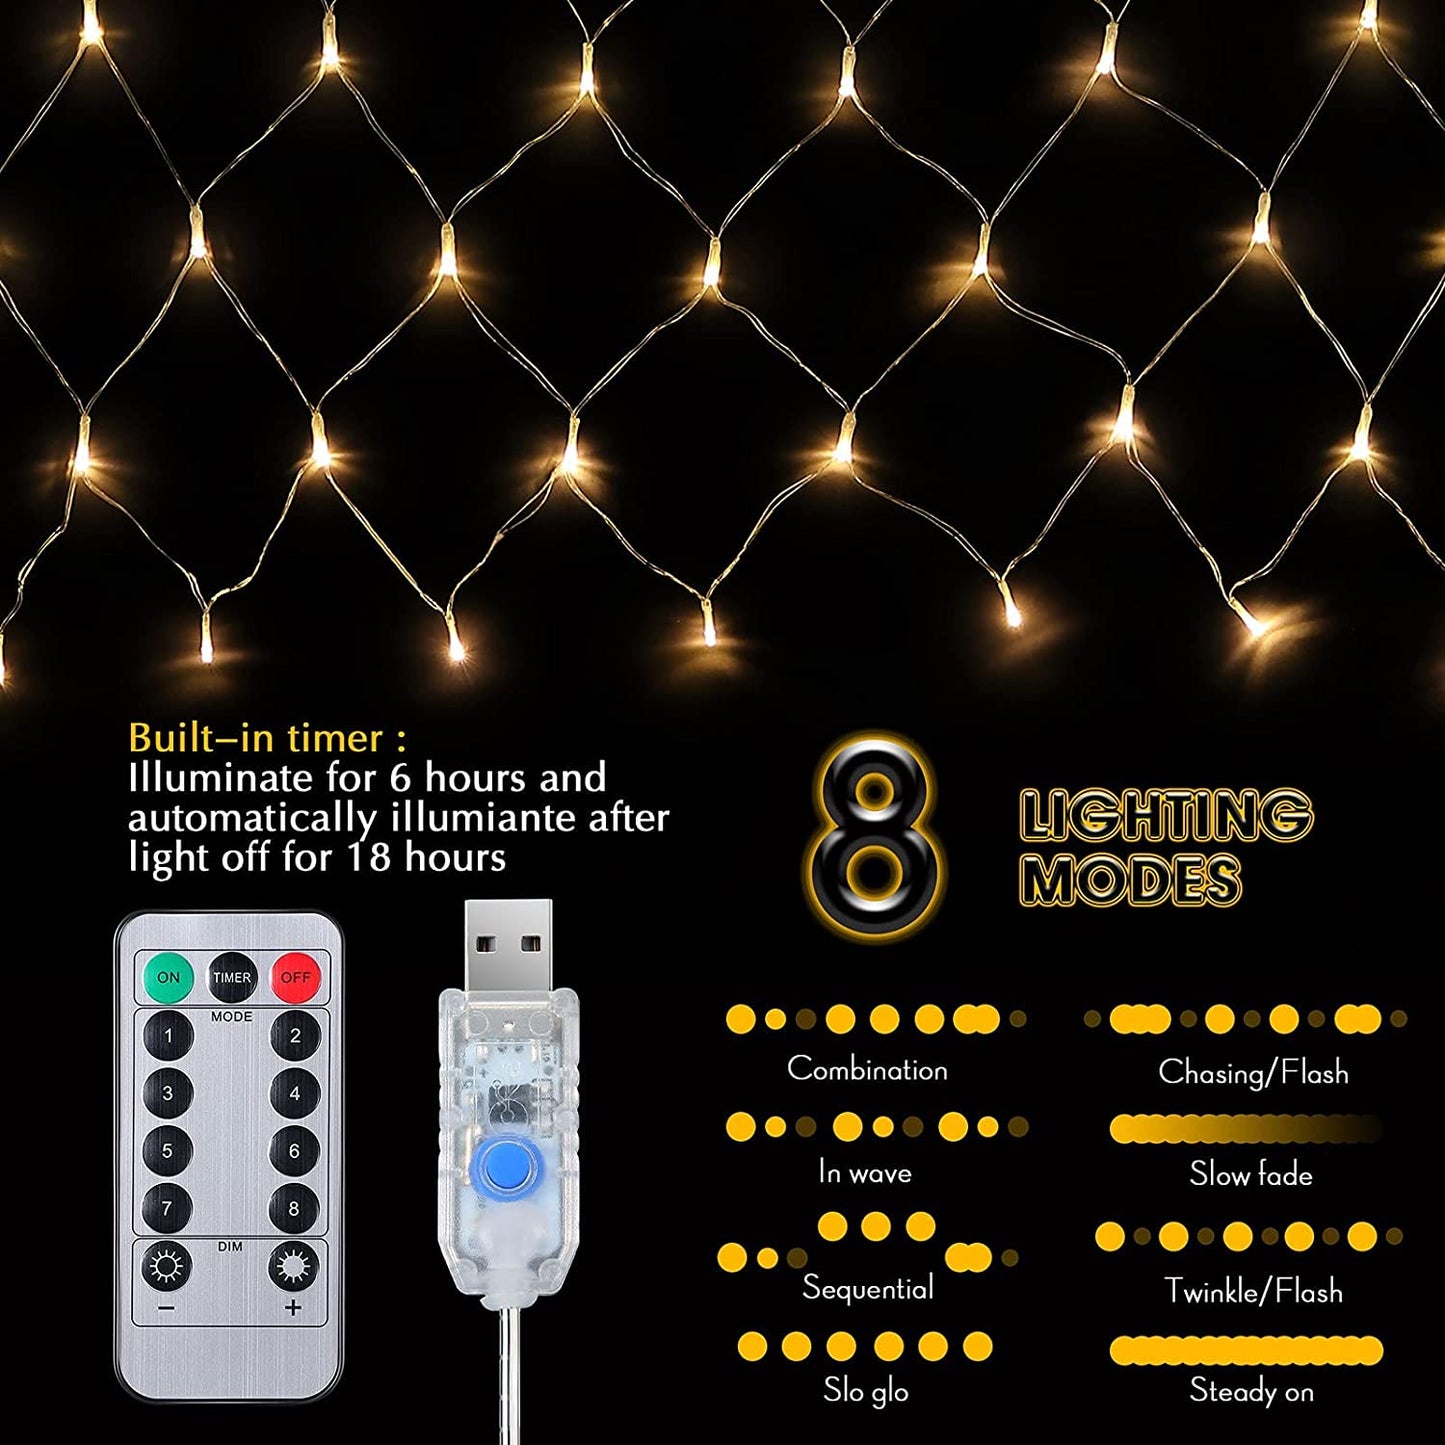 Christmas Hanging Photo Display 3.3 x 3.3 Ft, 75 LED Net Photo Clips Christmas String Light with 25 Clips and Remote, 8 Modes USB Operated Christmas Fairy Lights for Home Indoor Wall Decor